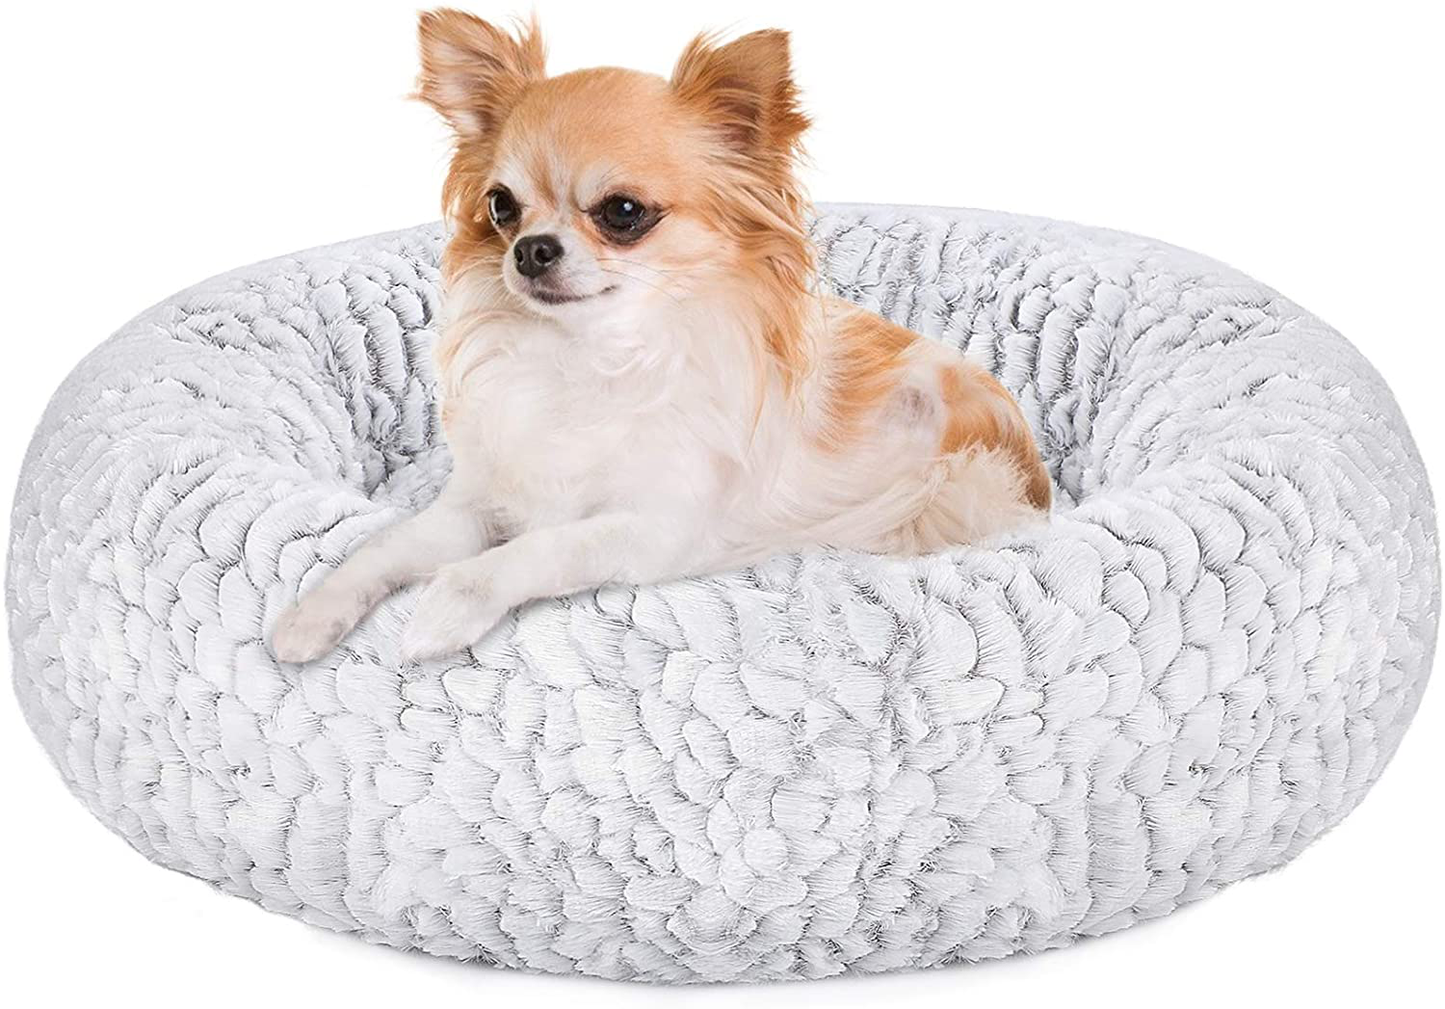 Lorfancy Calming Donut Dog Bed round Fluffy Plush Durable Washable Cuddler Anxiety Warm Dog Beds Mats for Large Medium Small Pet Dogs Cats